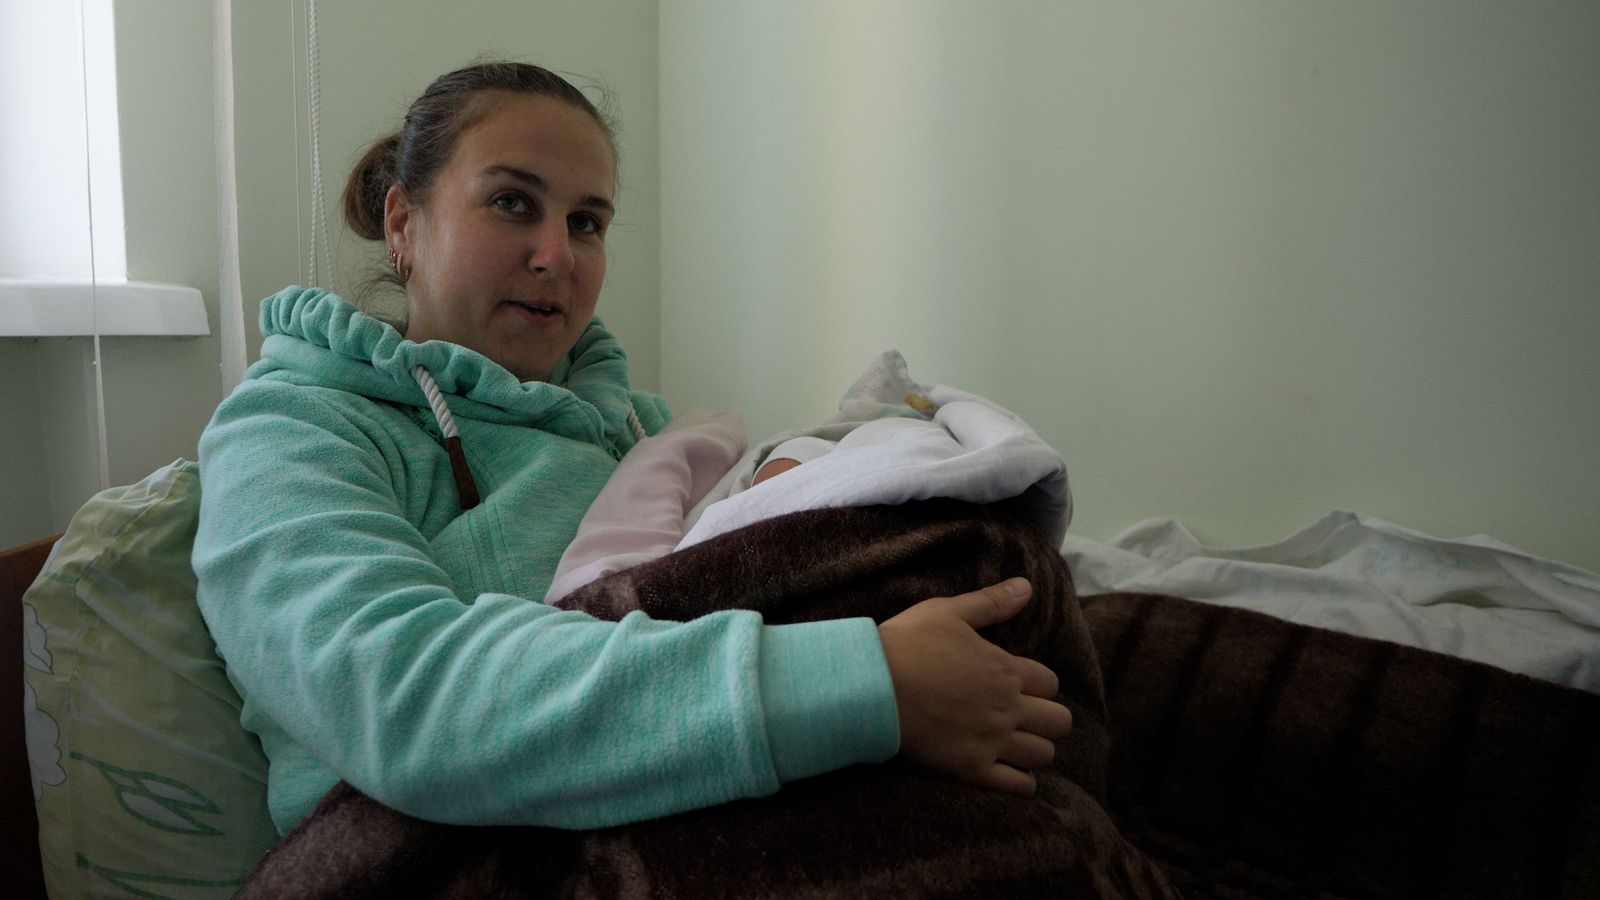 Ukraine war: Hope and hardship inside the maternity ward in newly liberated Kherson